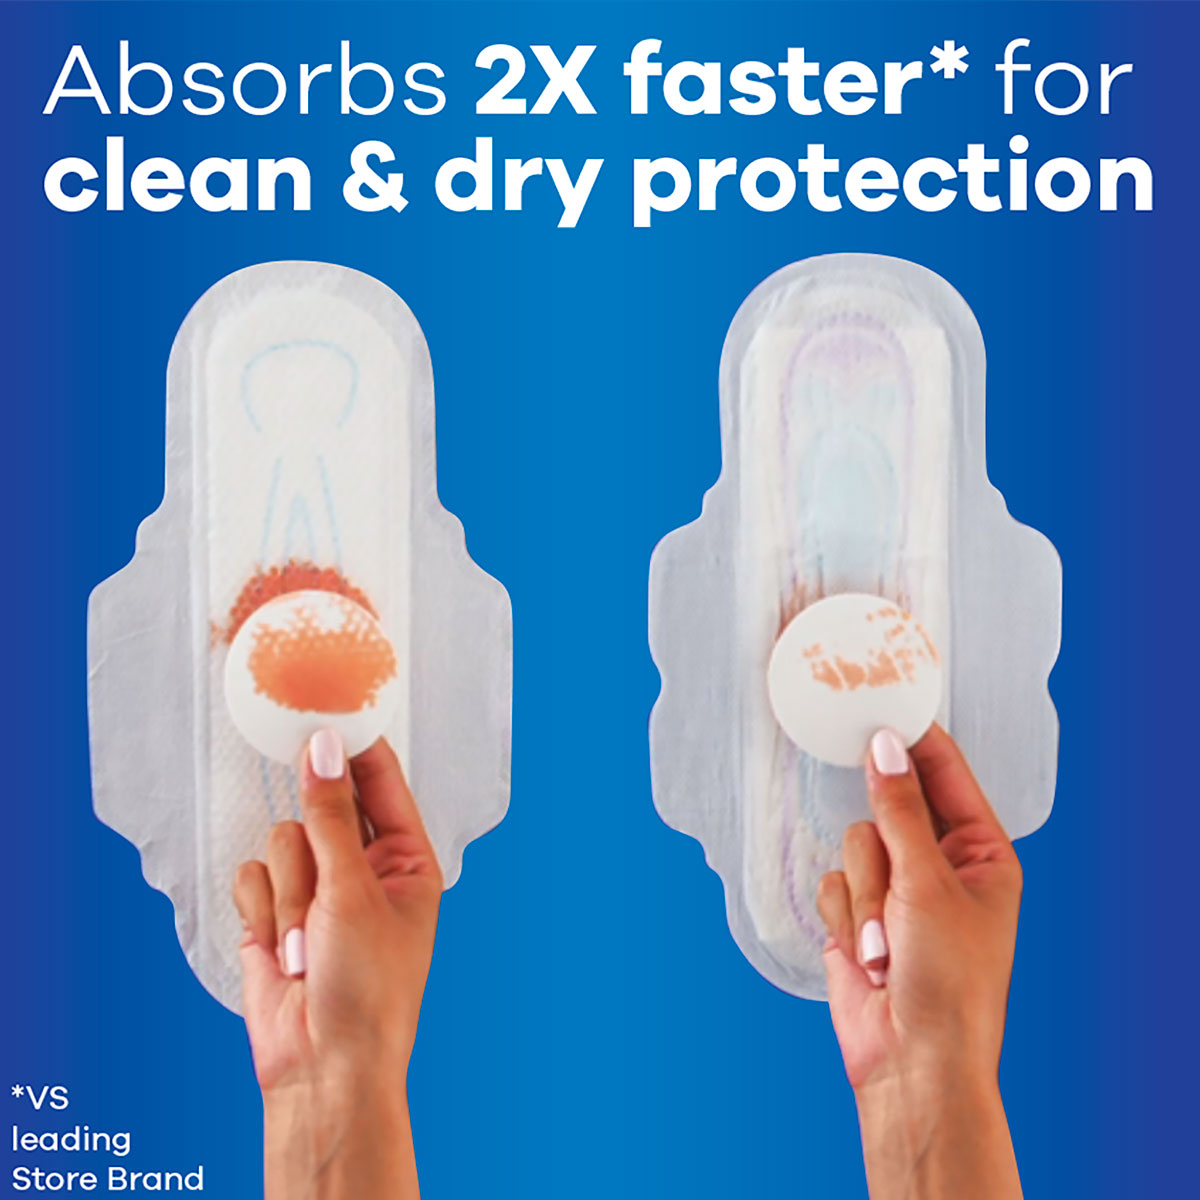 absorbs 2x faster for clean & dry protection